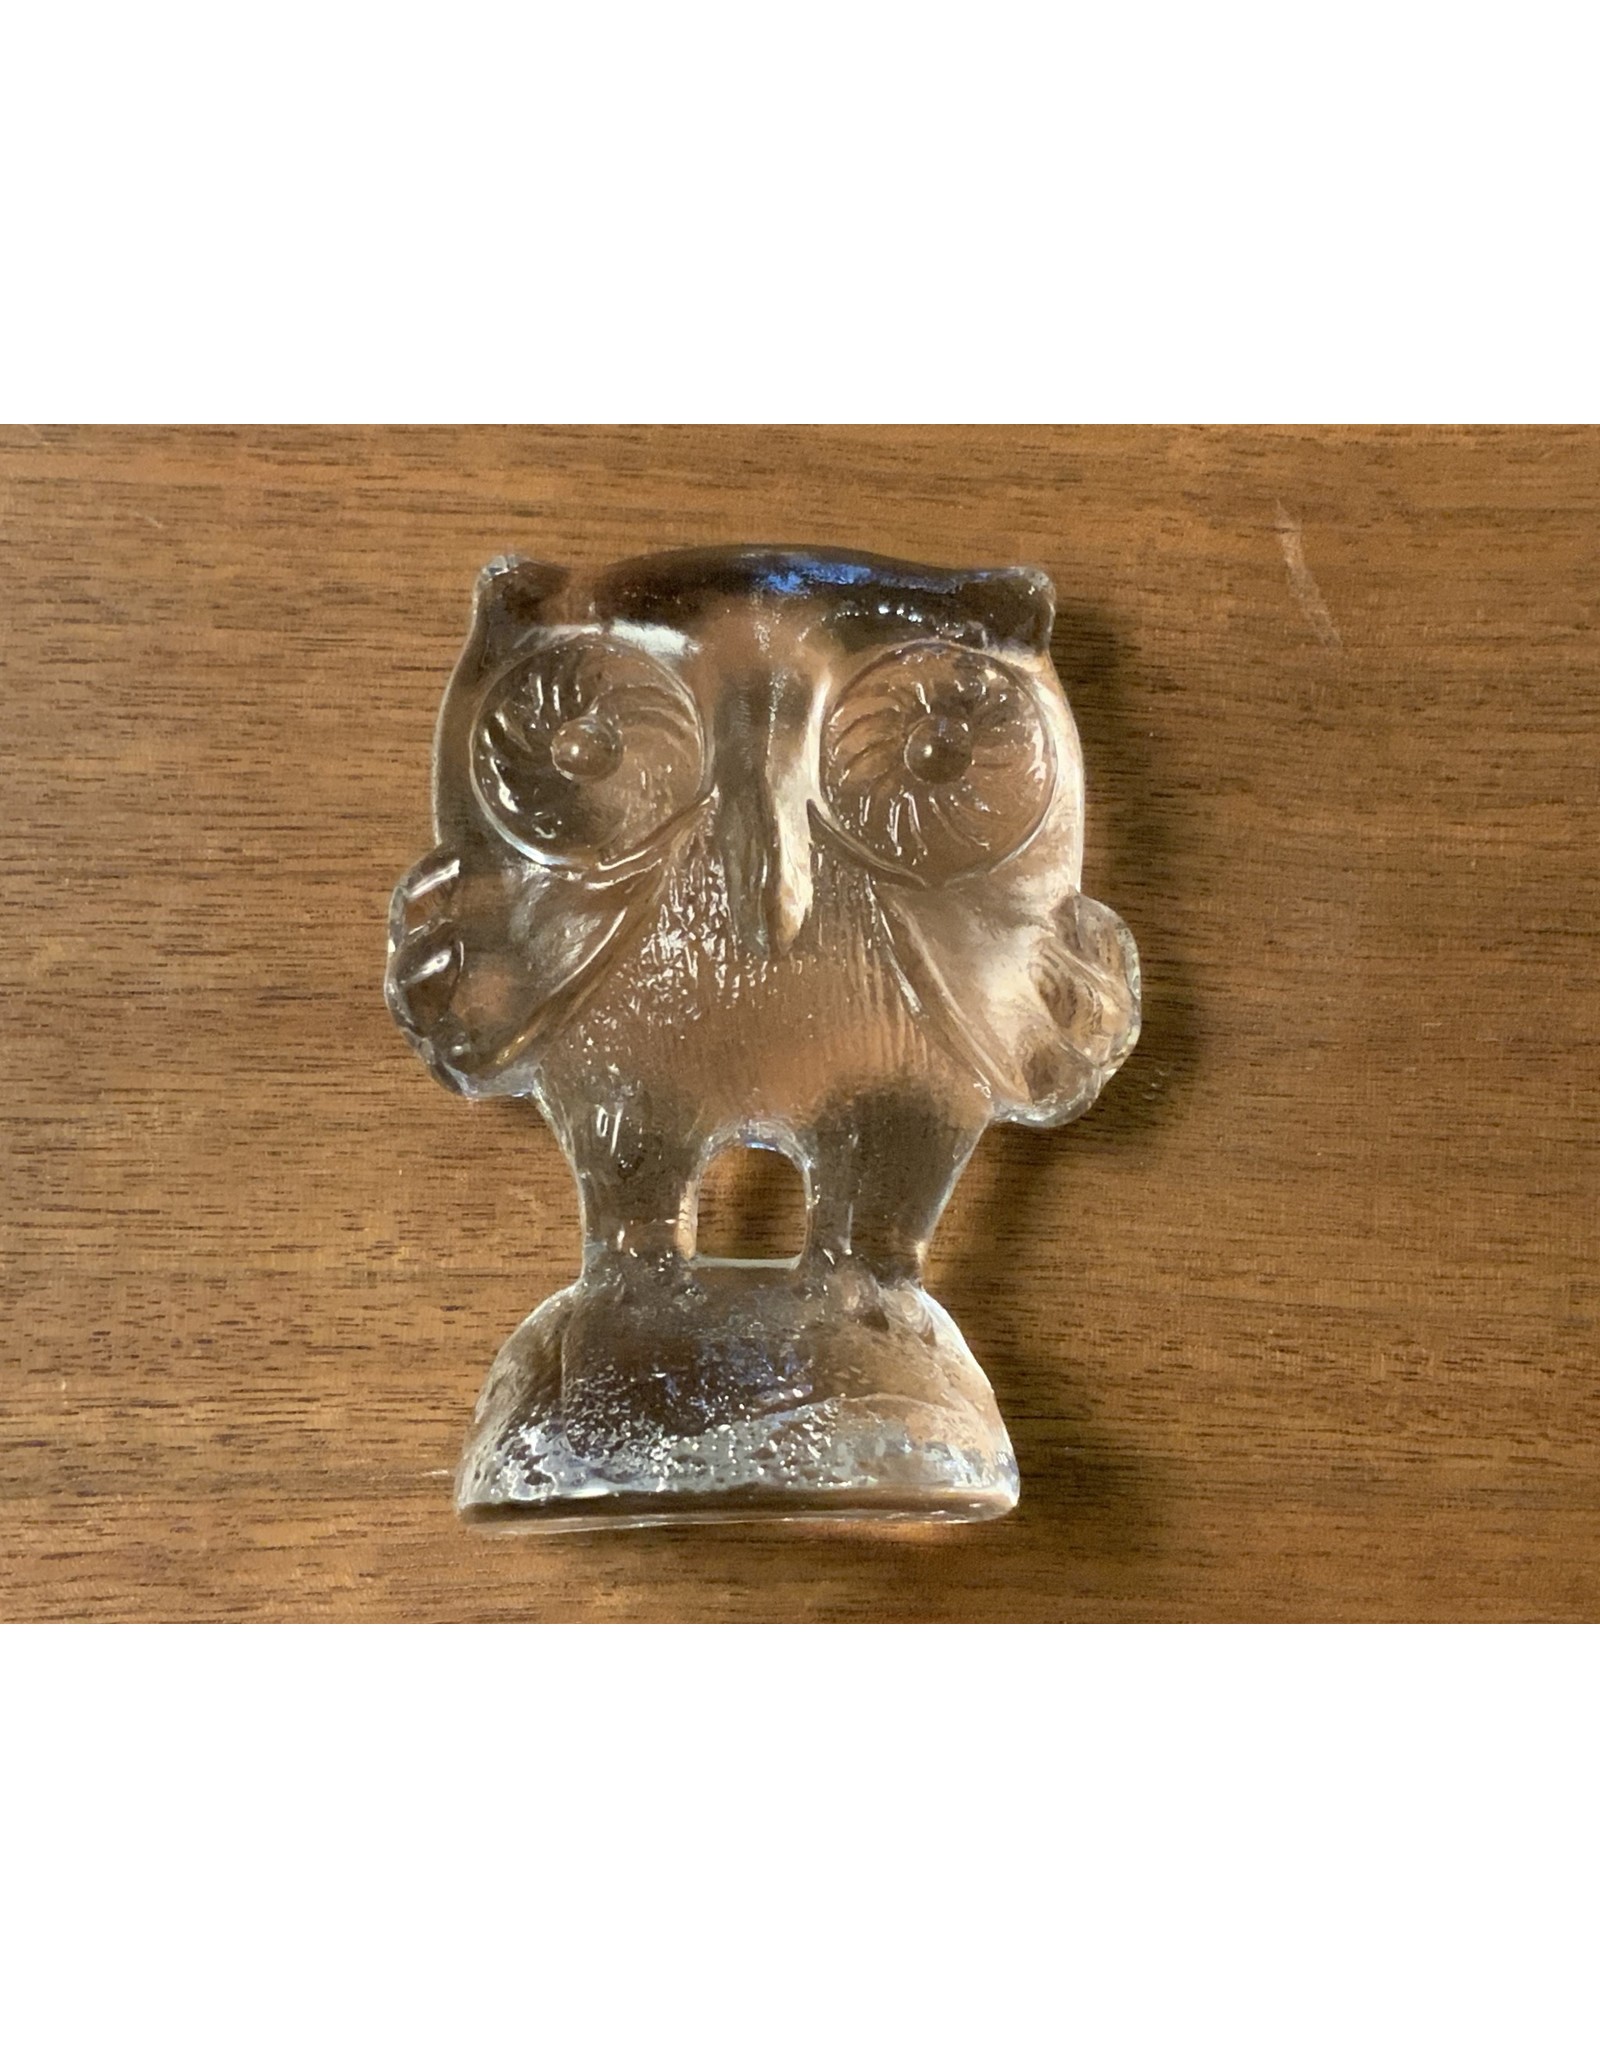 Pat and Gina Vintage Kosta Boda  Glass Owl Collectible Paperweight Figurine